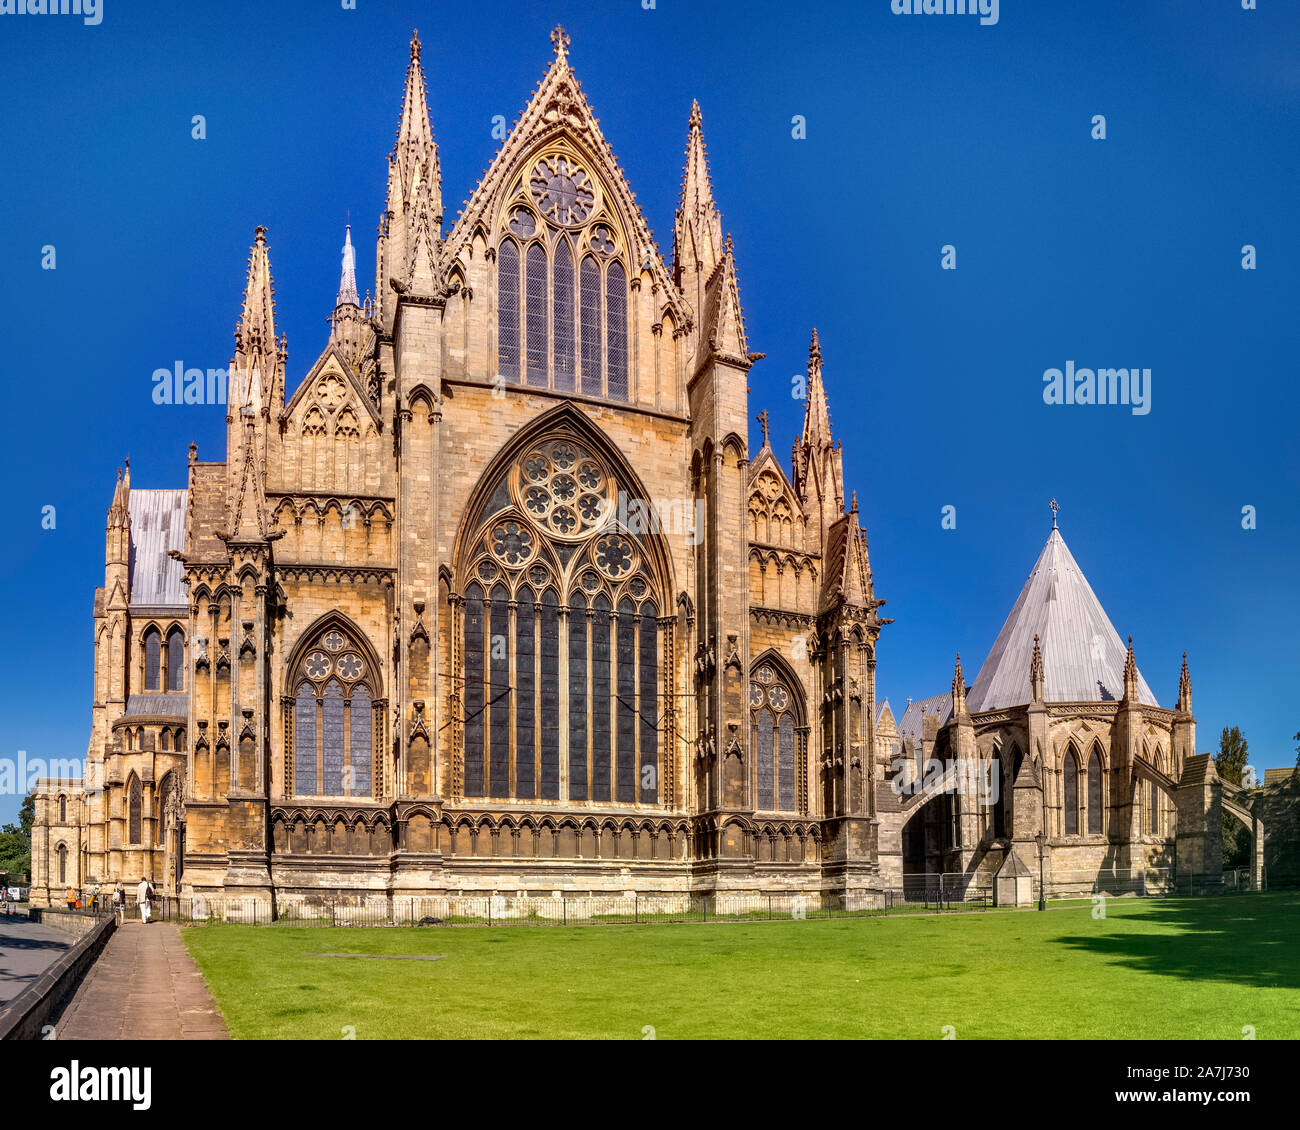 2 July 2019: Lincoln, Lincolnshire, UK - The East facade and Chapter House of Lincoln Cathedral. Stock Photo